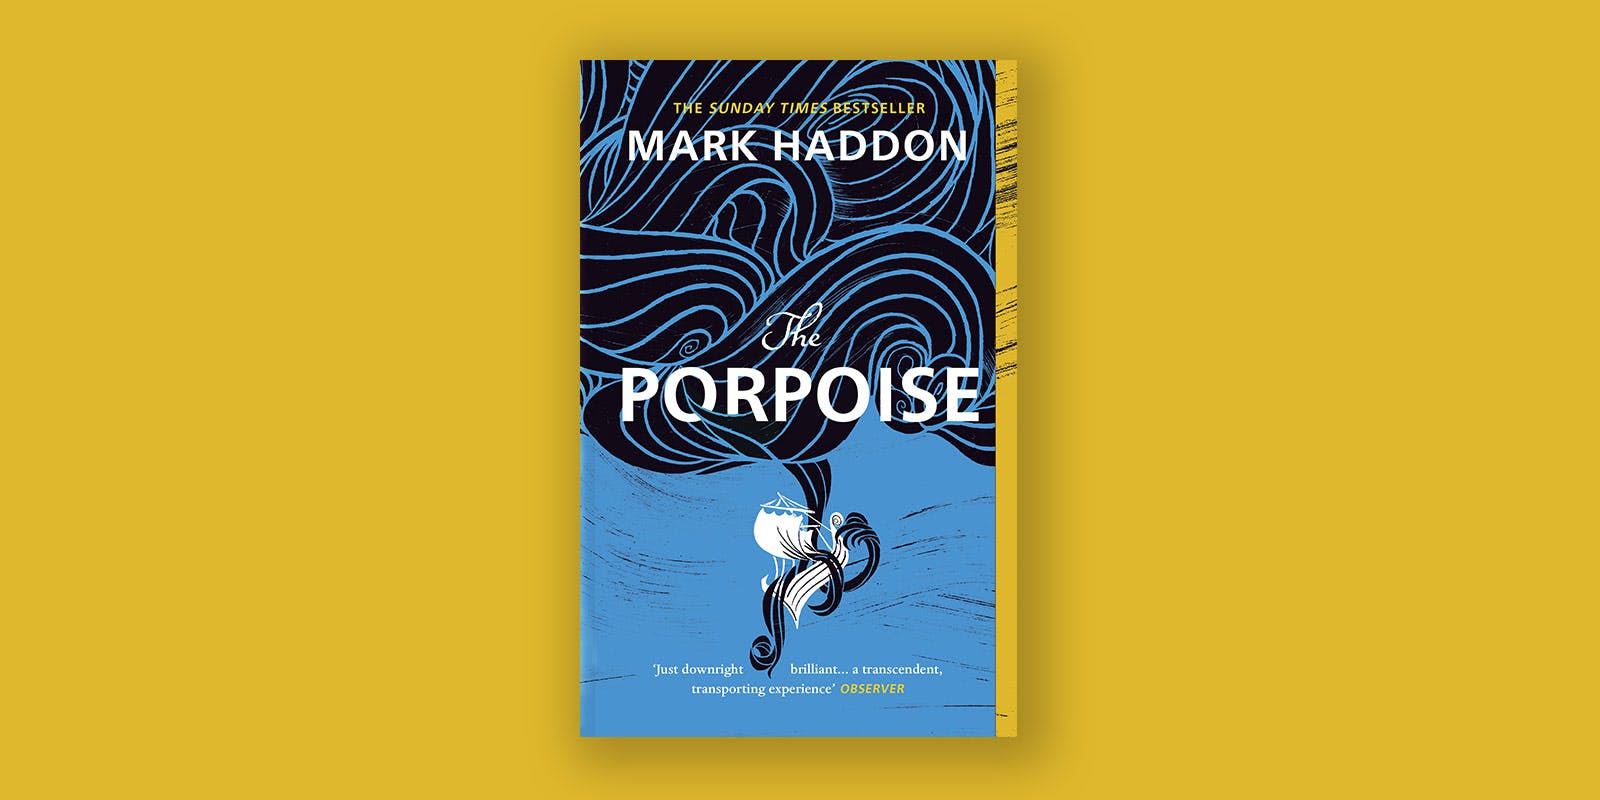 The Porpoise book club notes